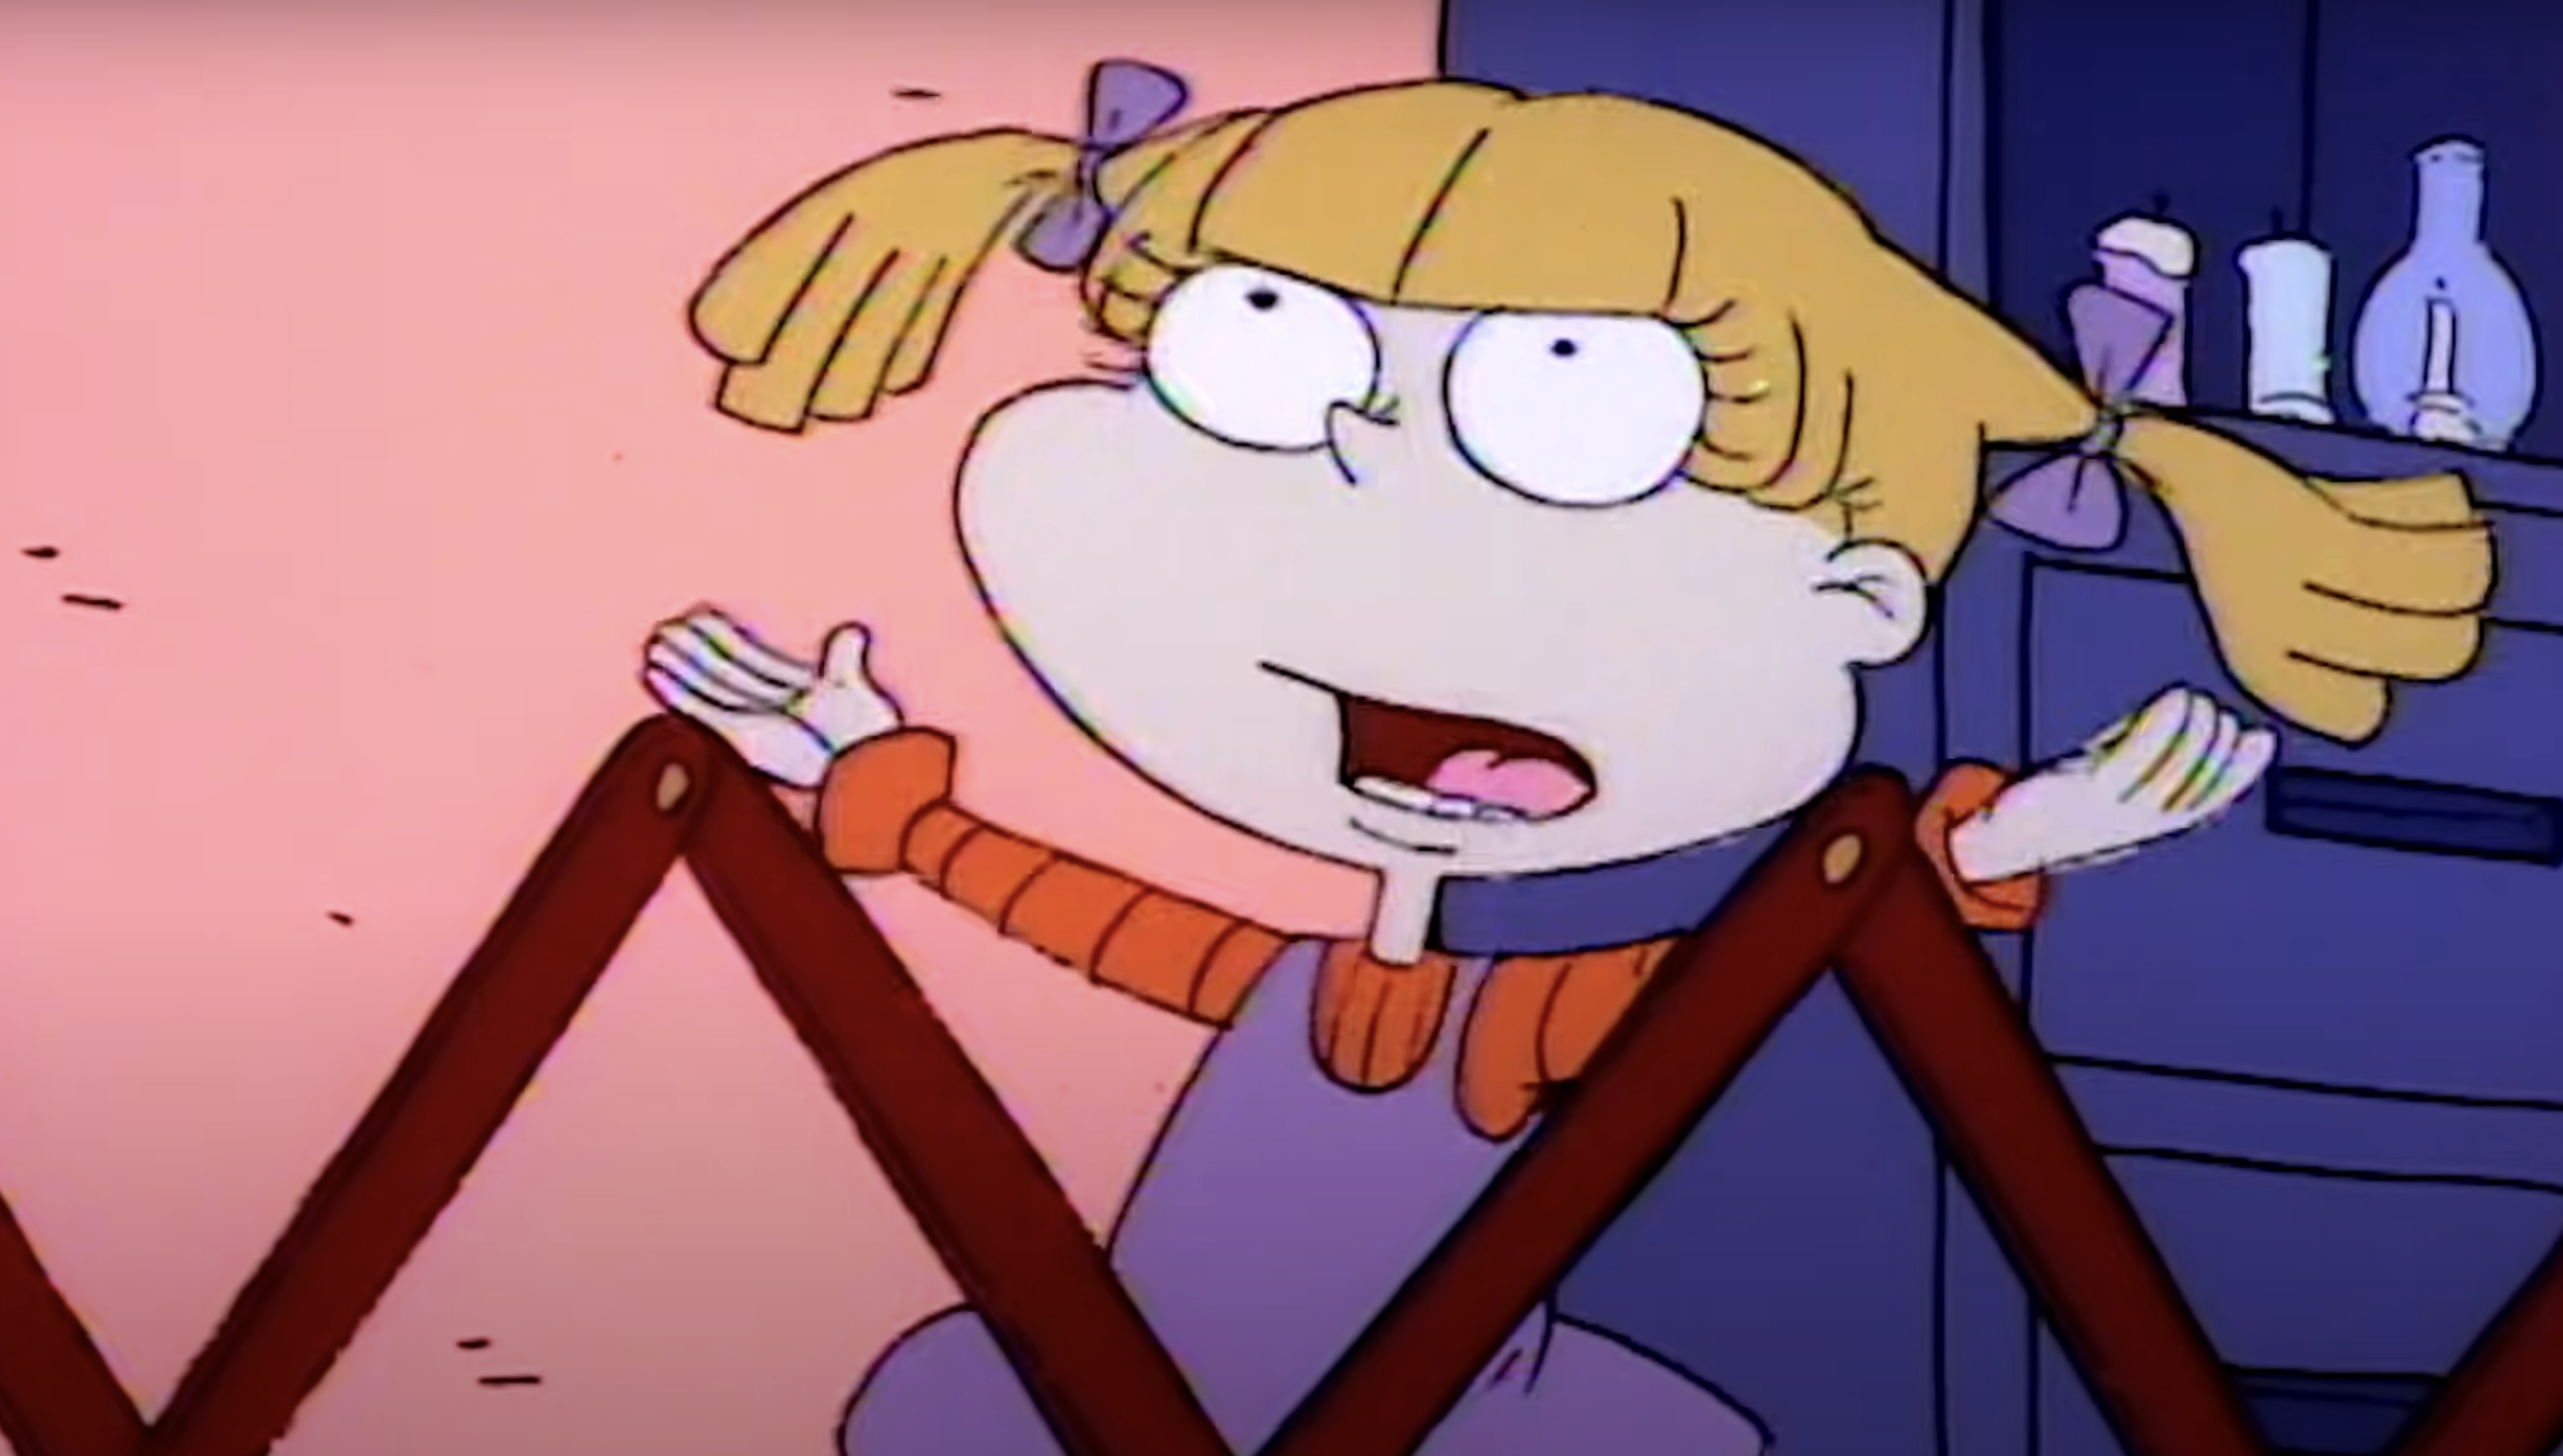 Character Angelica from the animated series &#x27;Rugrats&#x27;, looking frustrated while standing in a playpen